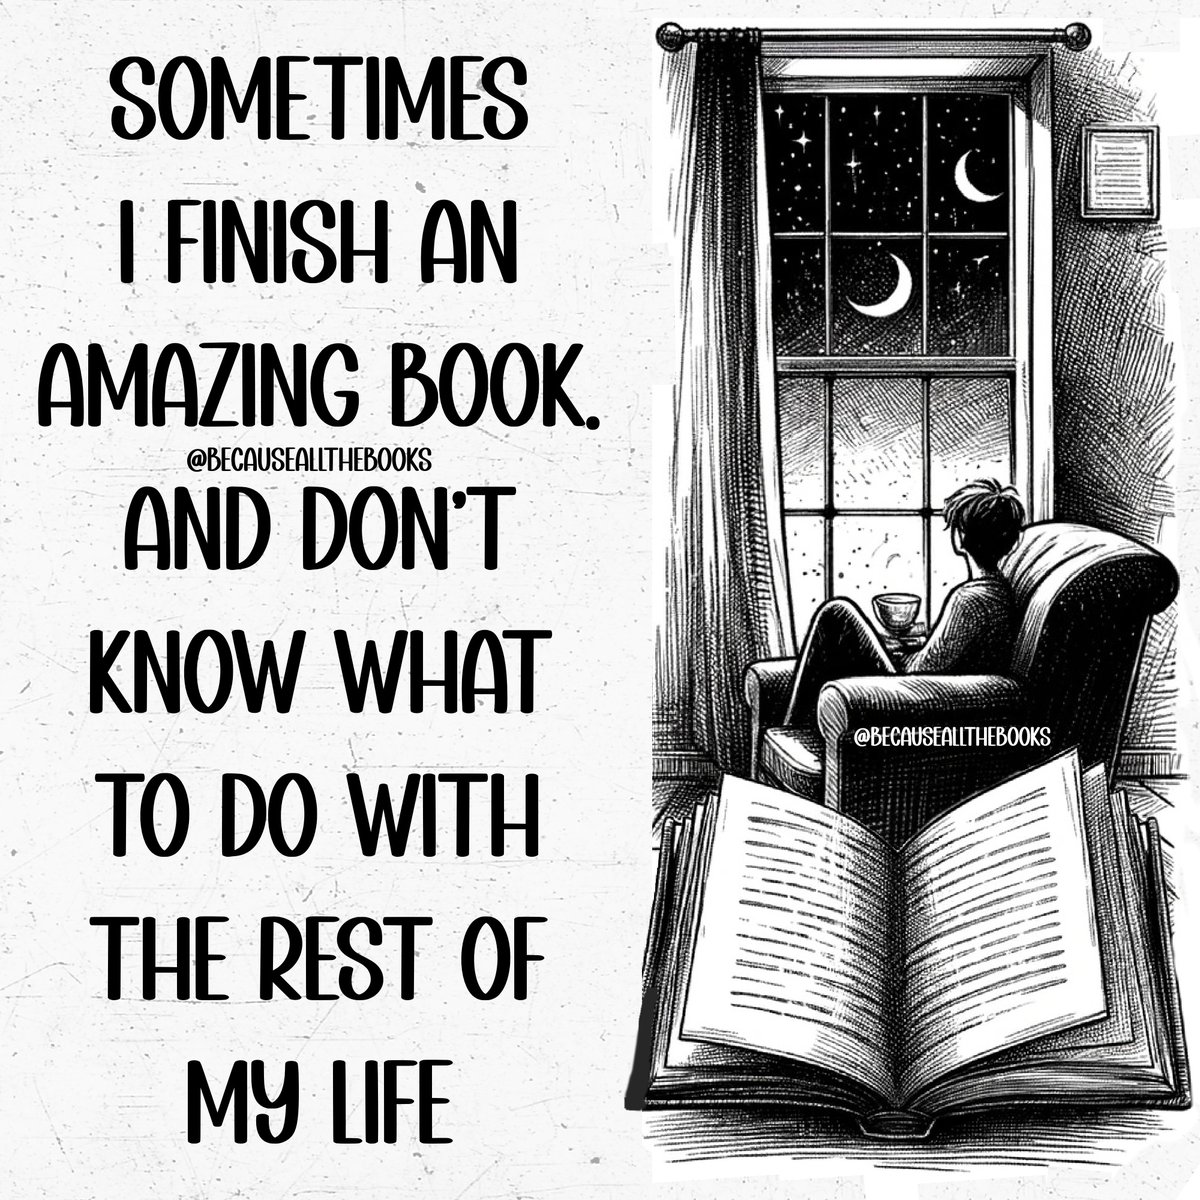 I suppose we carry on by looking for the next amazing book!

#BecauseAllTheBooks #BookHangover #AmazingBook #NextBook #ReadMore